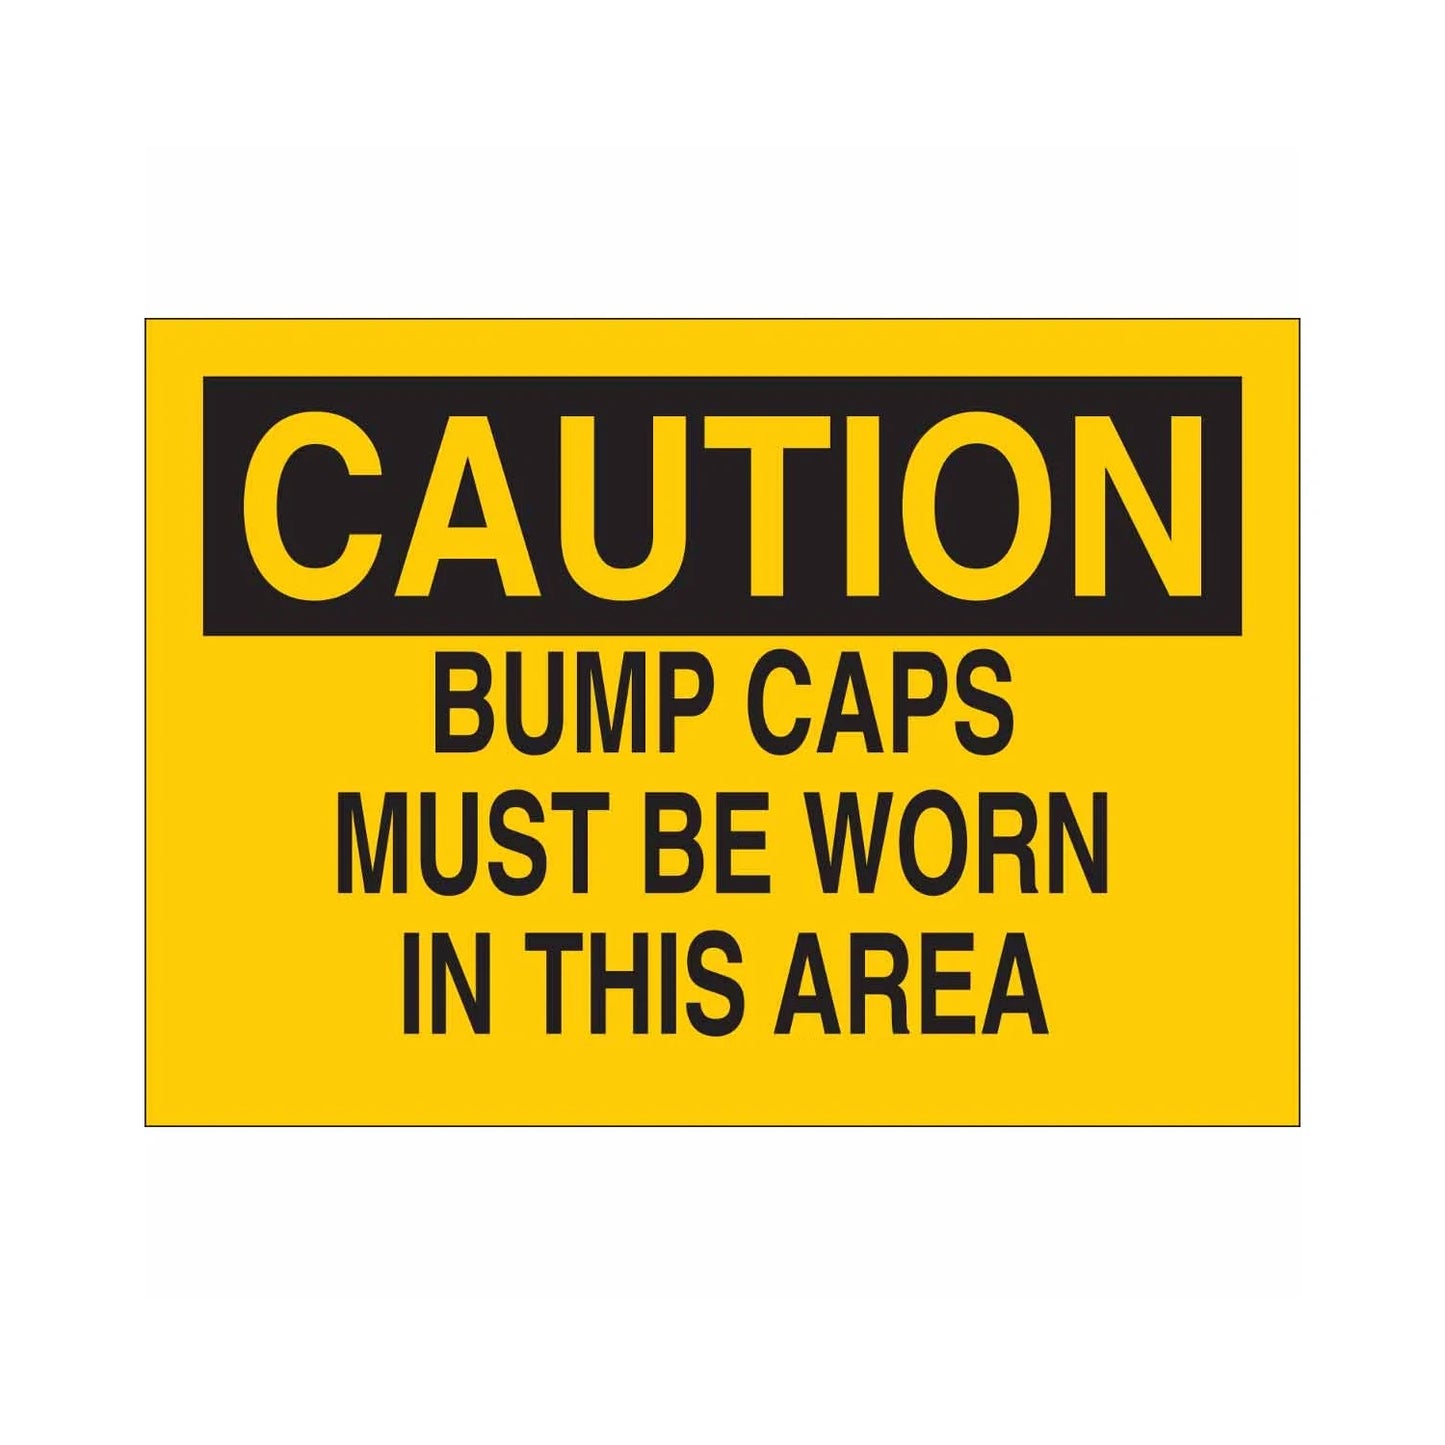 CAUTION Bump Caps Must Be Worn In This Area Sign